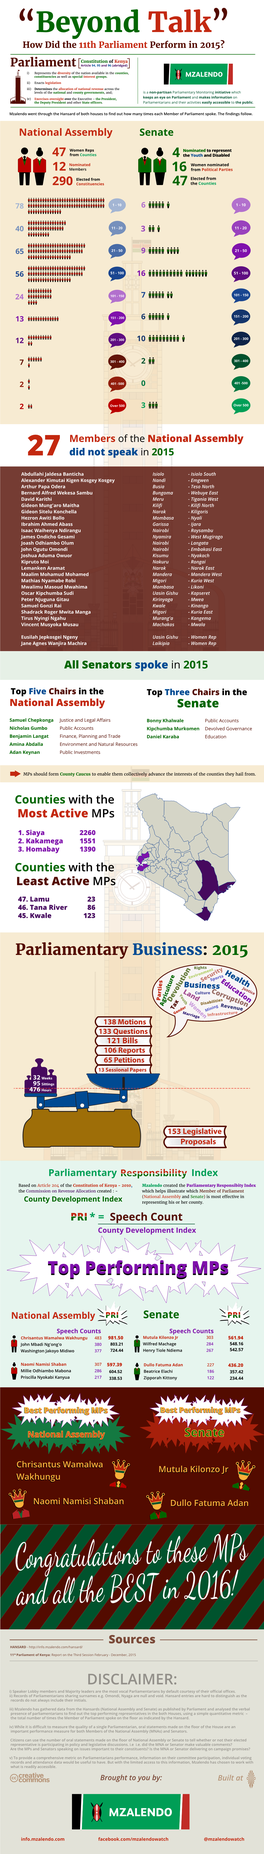 How Did the 11Th Parliament Perform in 2015?